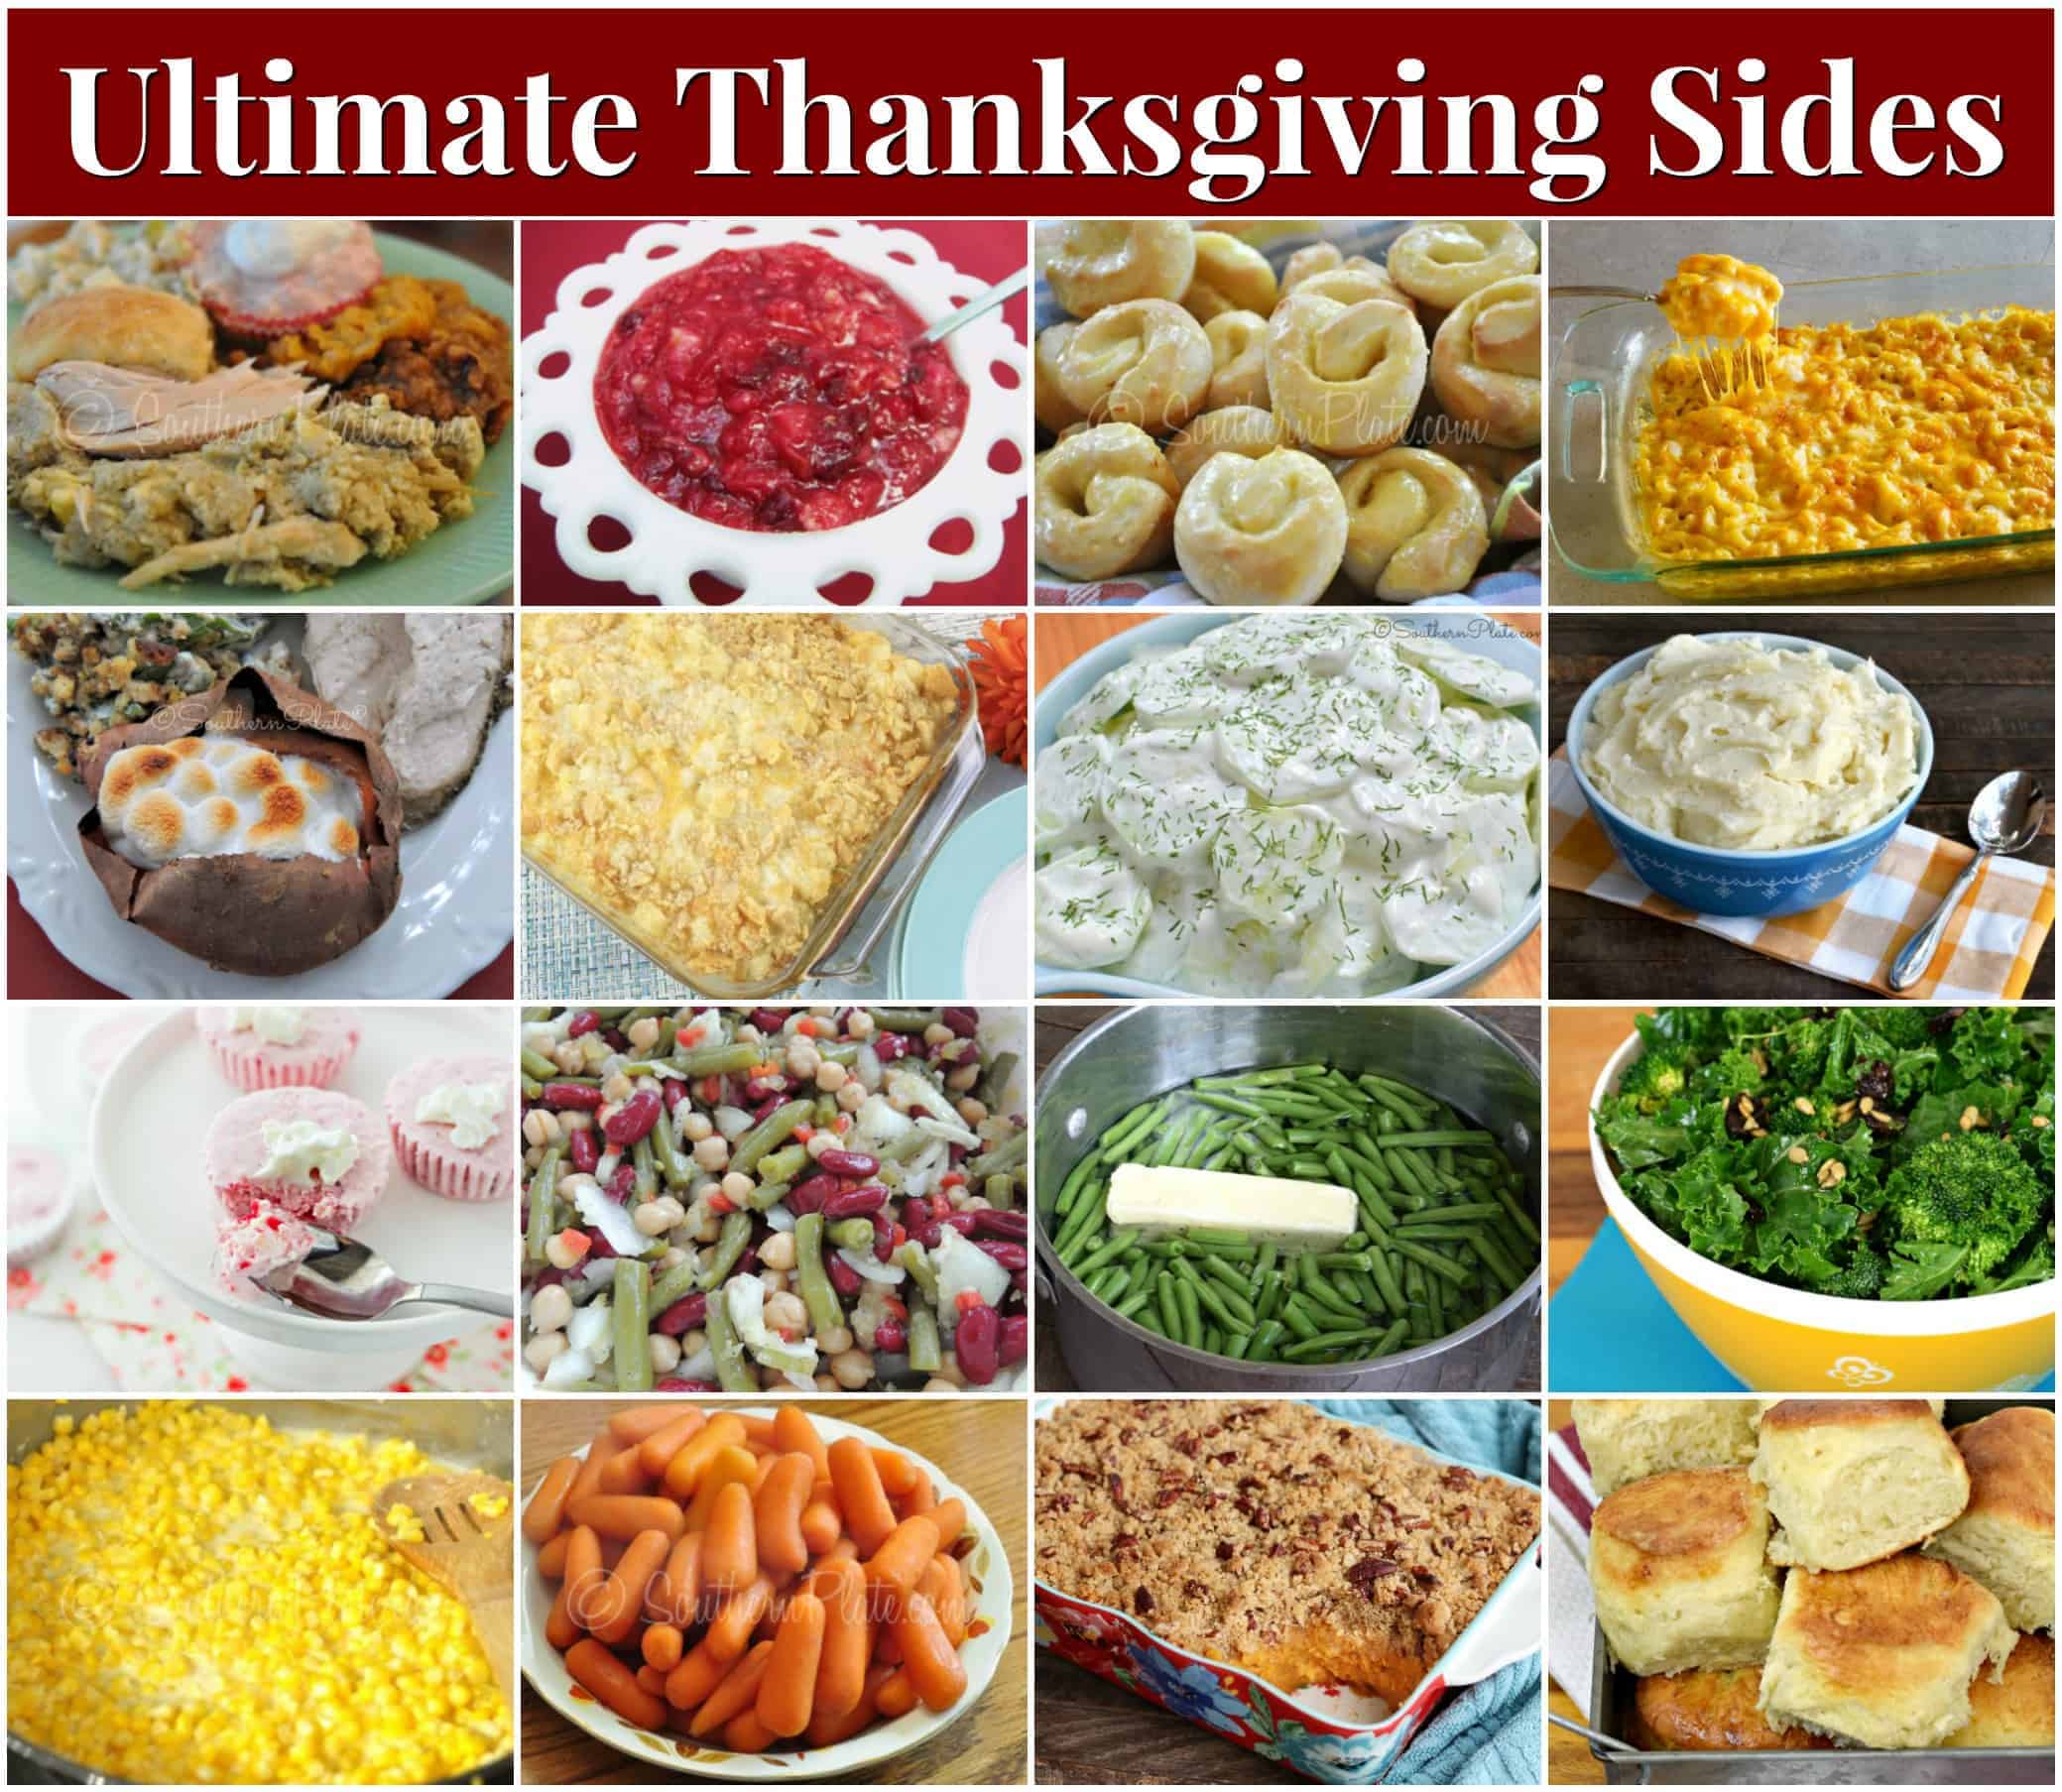 Ultimate Thanksgiving Side Dish Recipes - Southern Plate